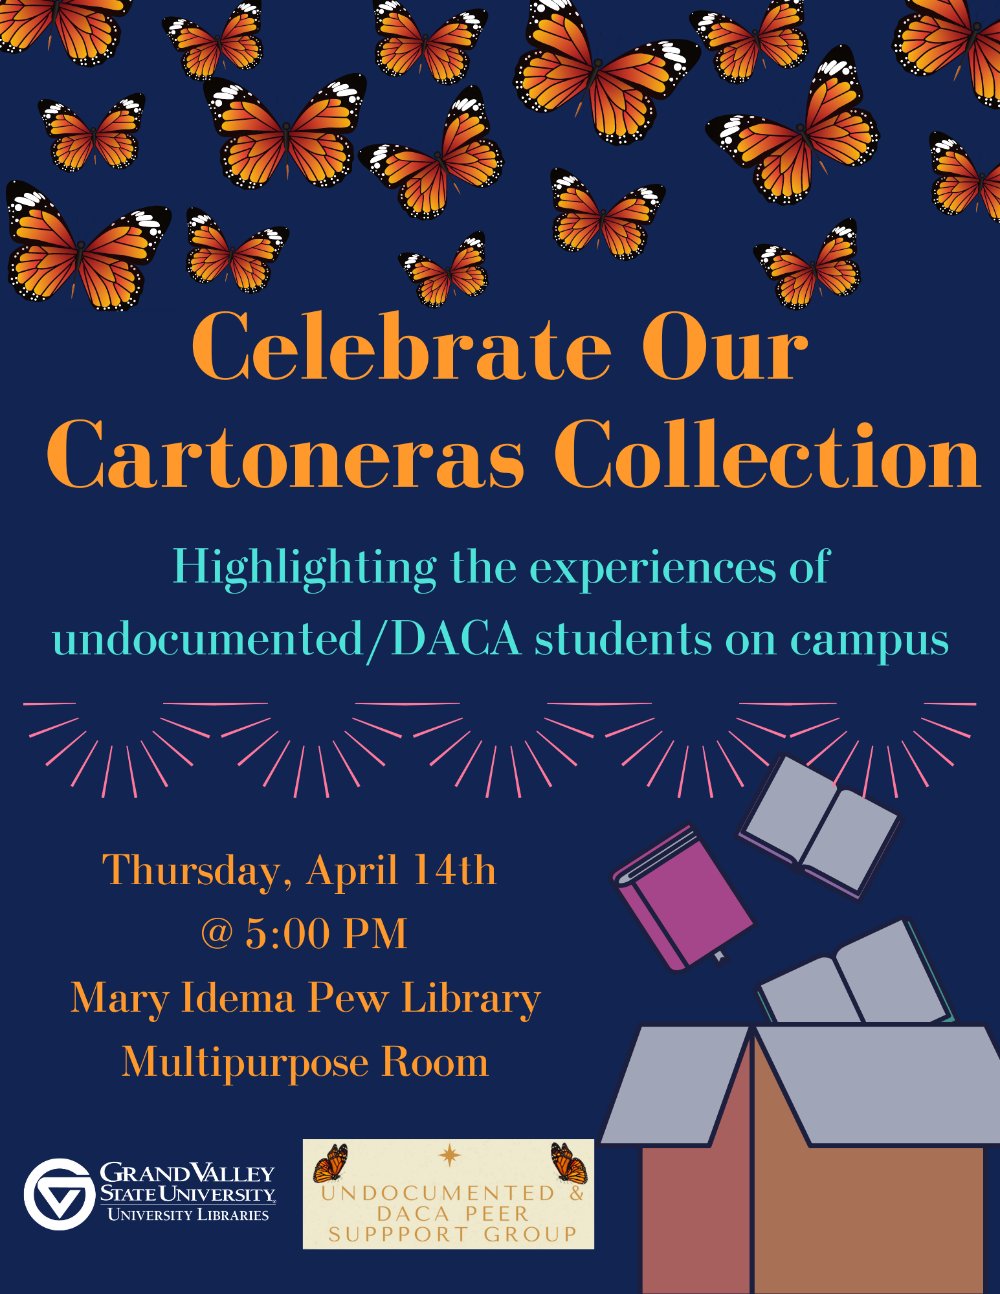 Flyer with cartoneras event details including imagery of monarch butterflies and books being placed in a box